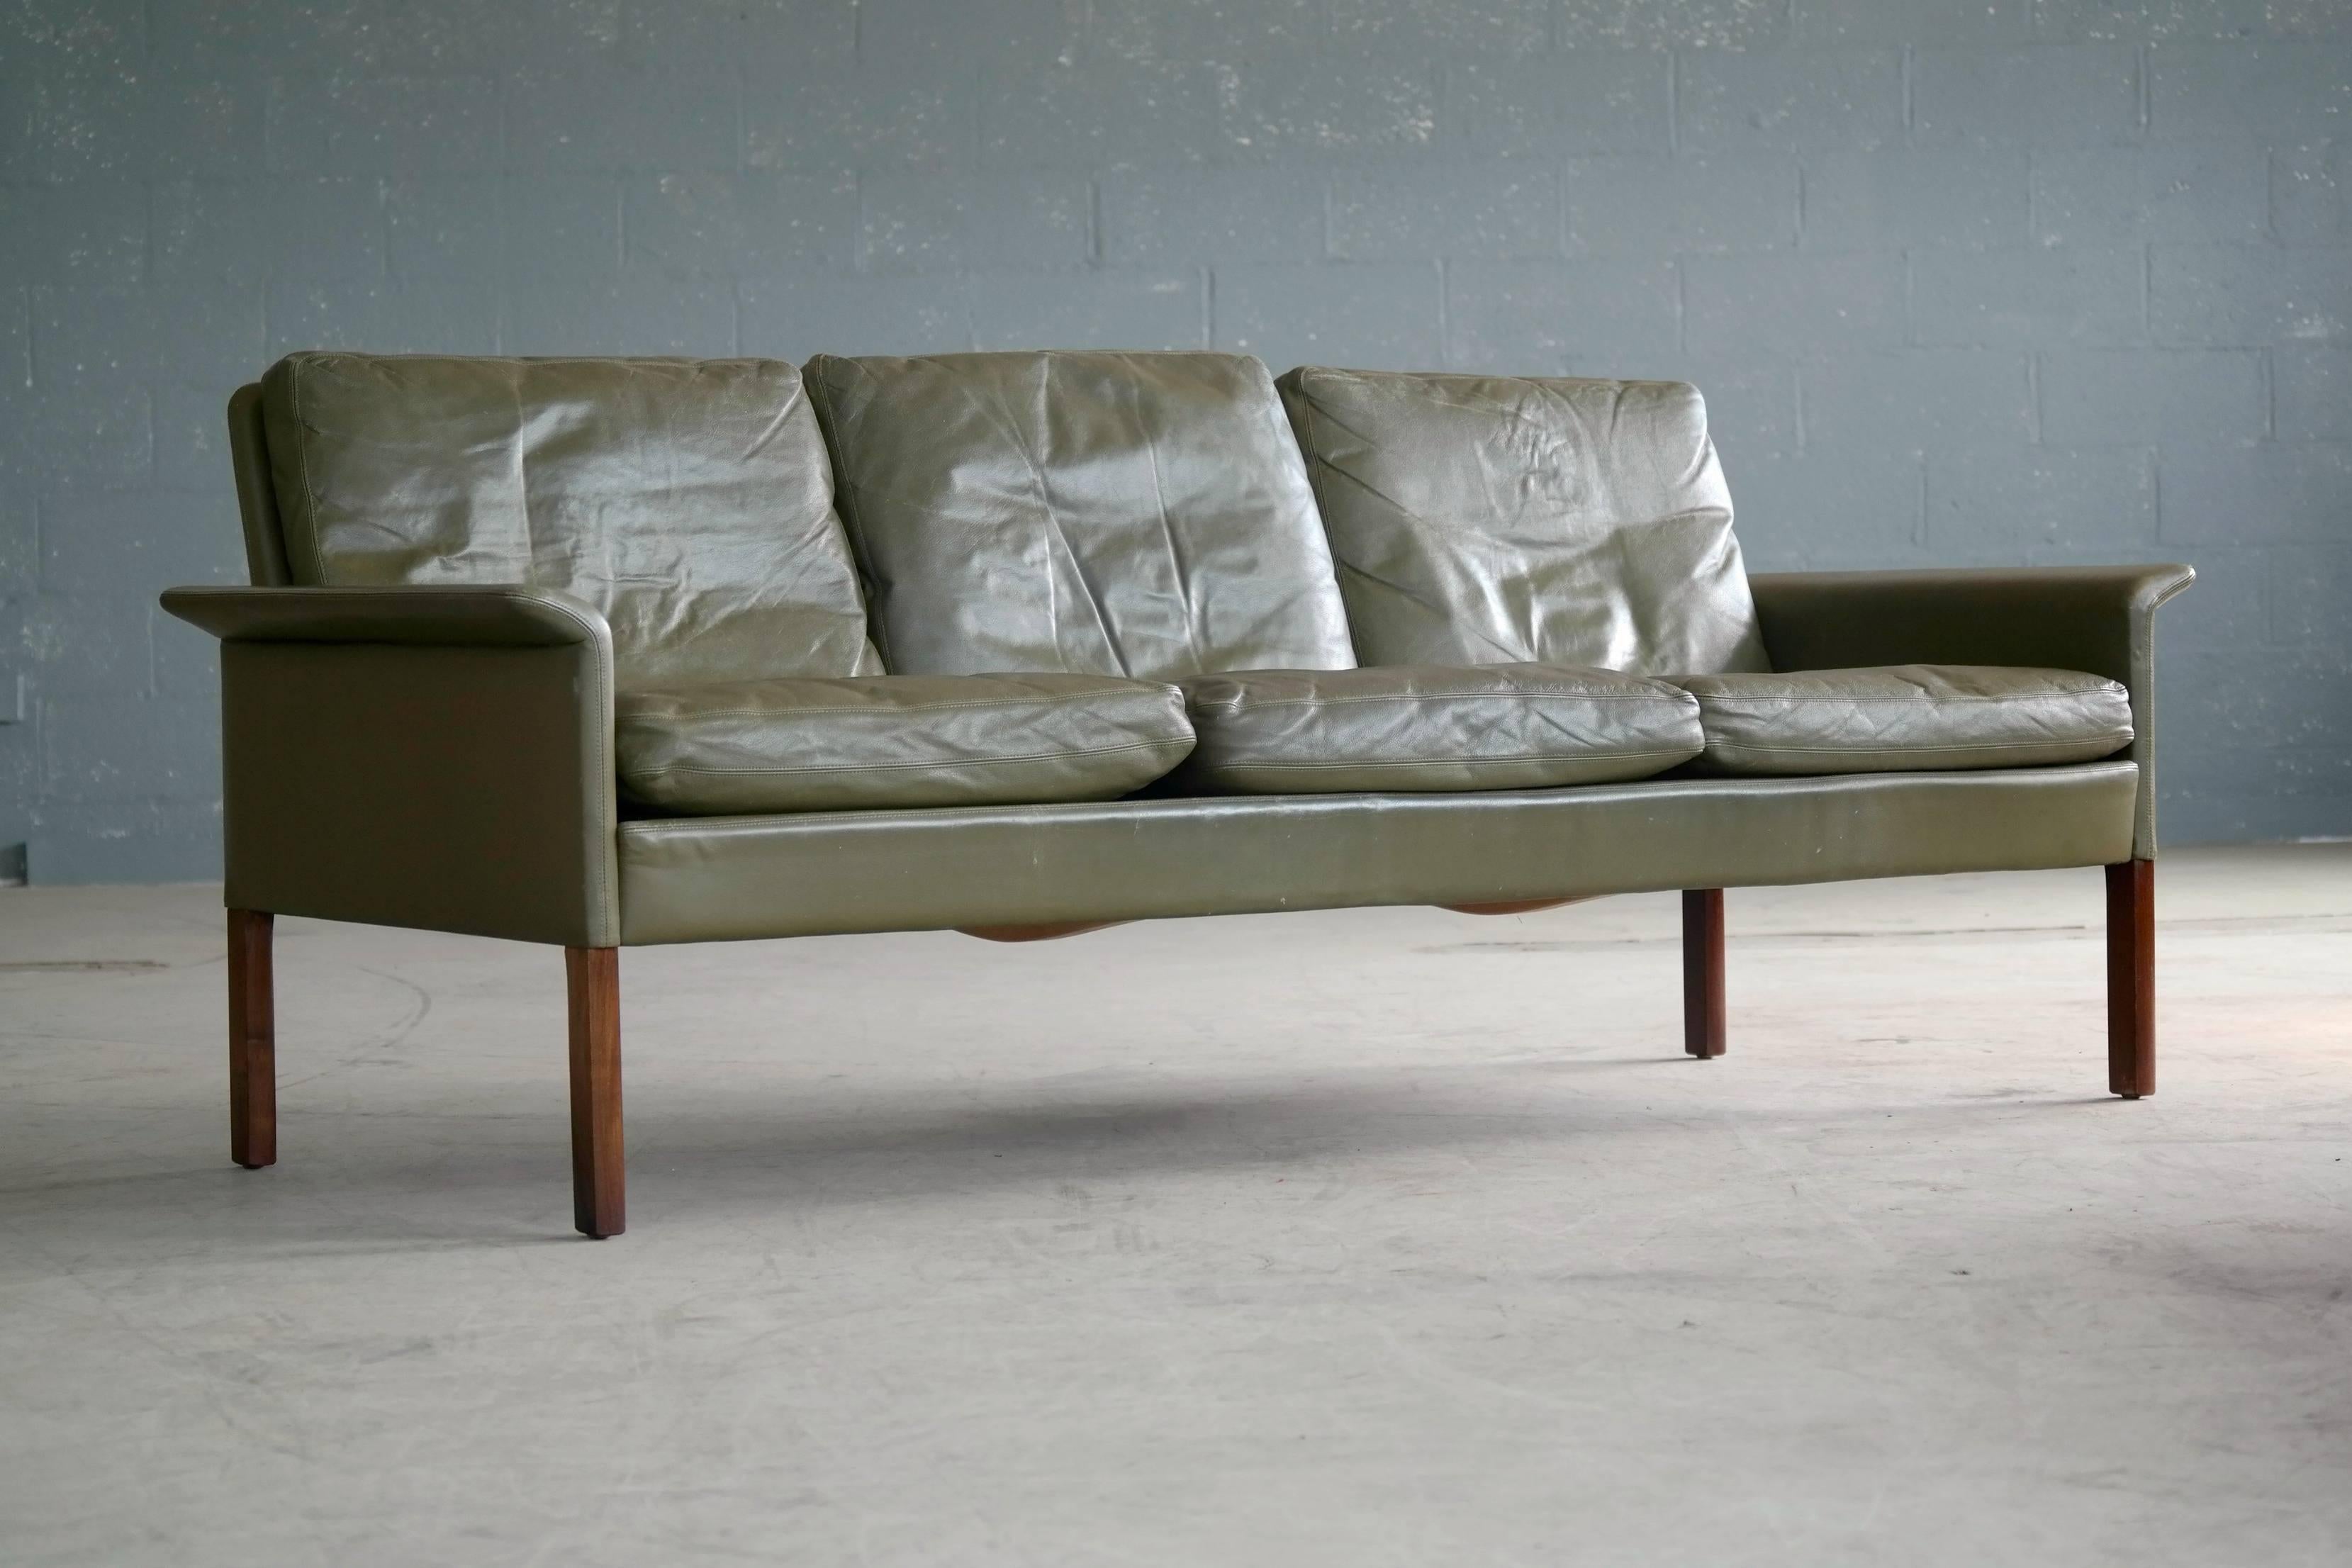 The ultimate style and the color of green written all-over it. Classic three-seat sofa designed by Hans Olsen in the 1960s for CS Mobler in Glostrup, Denmark. Covered in supple top grain leather in a very attractive hard to find green color with the